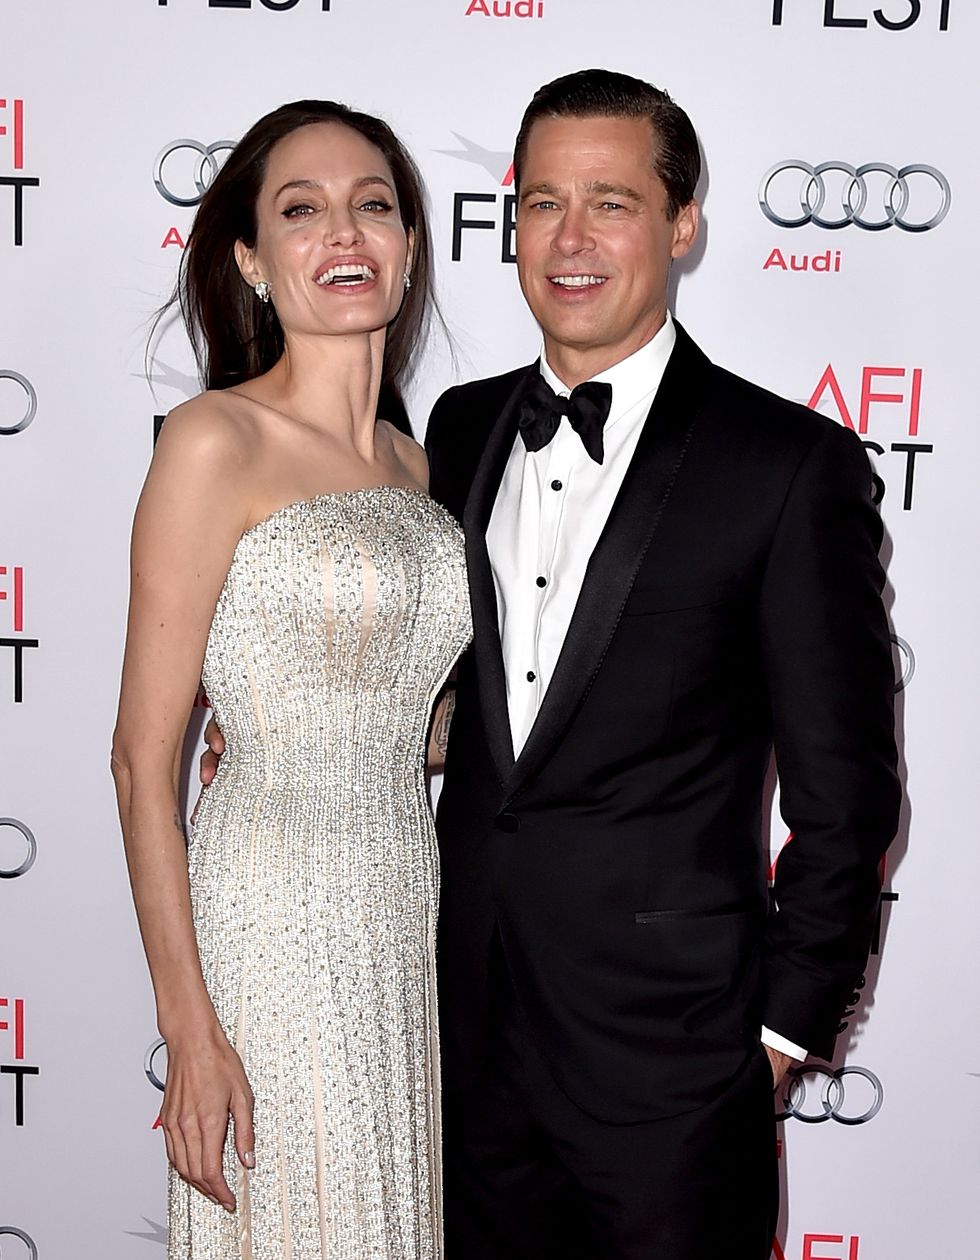 Angelina Jolie and Brad Pitt on the red carpet